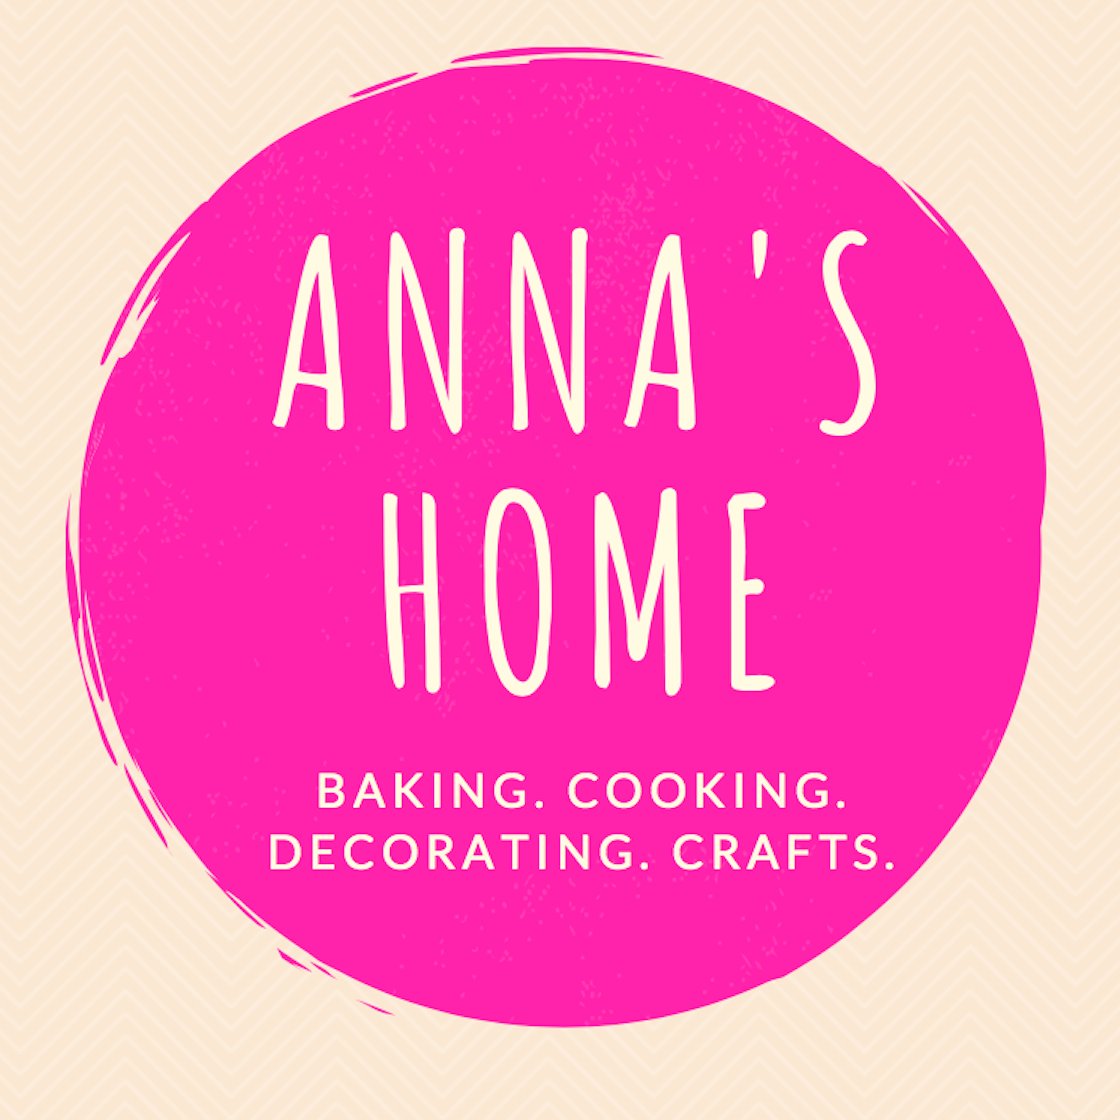 Anna's Home is the best place for tips on baking, cooking, decorating, crafts, and more!